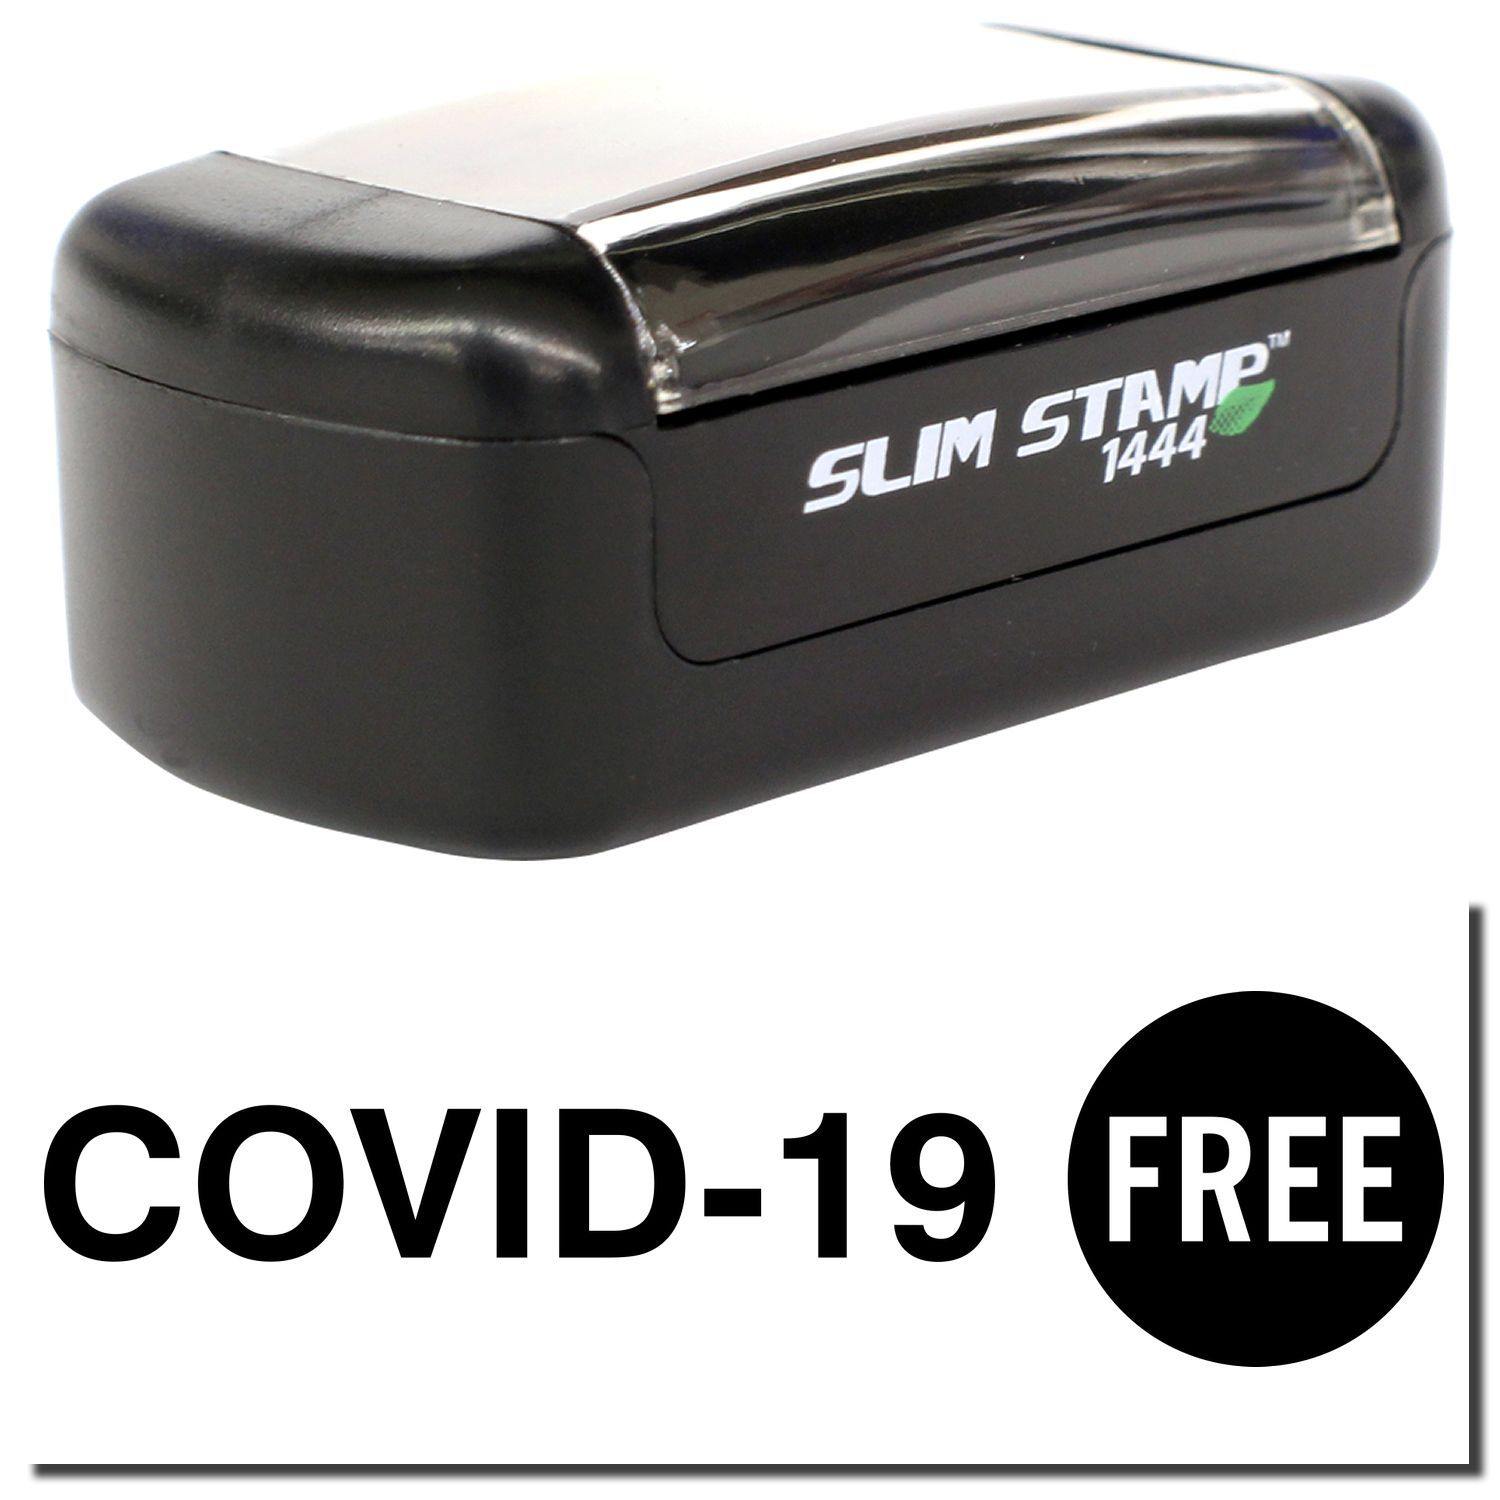 A stock office pre-inked stamp with a stamped image showing how the text "COVID-19 FREE" is displayed after stamping.